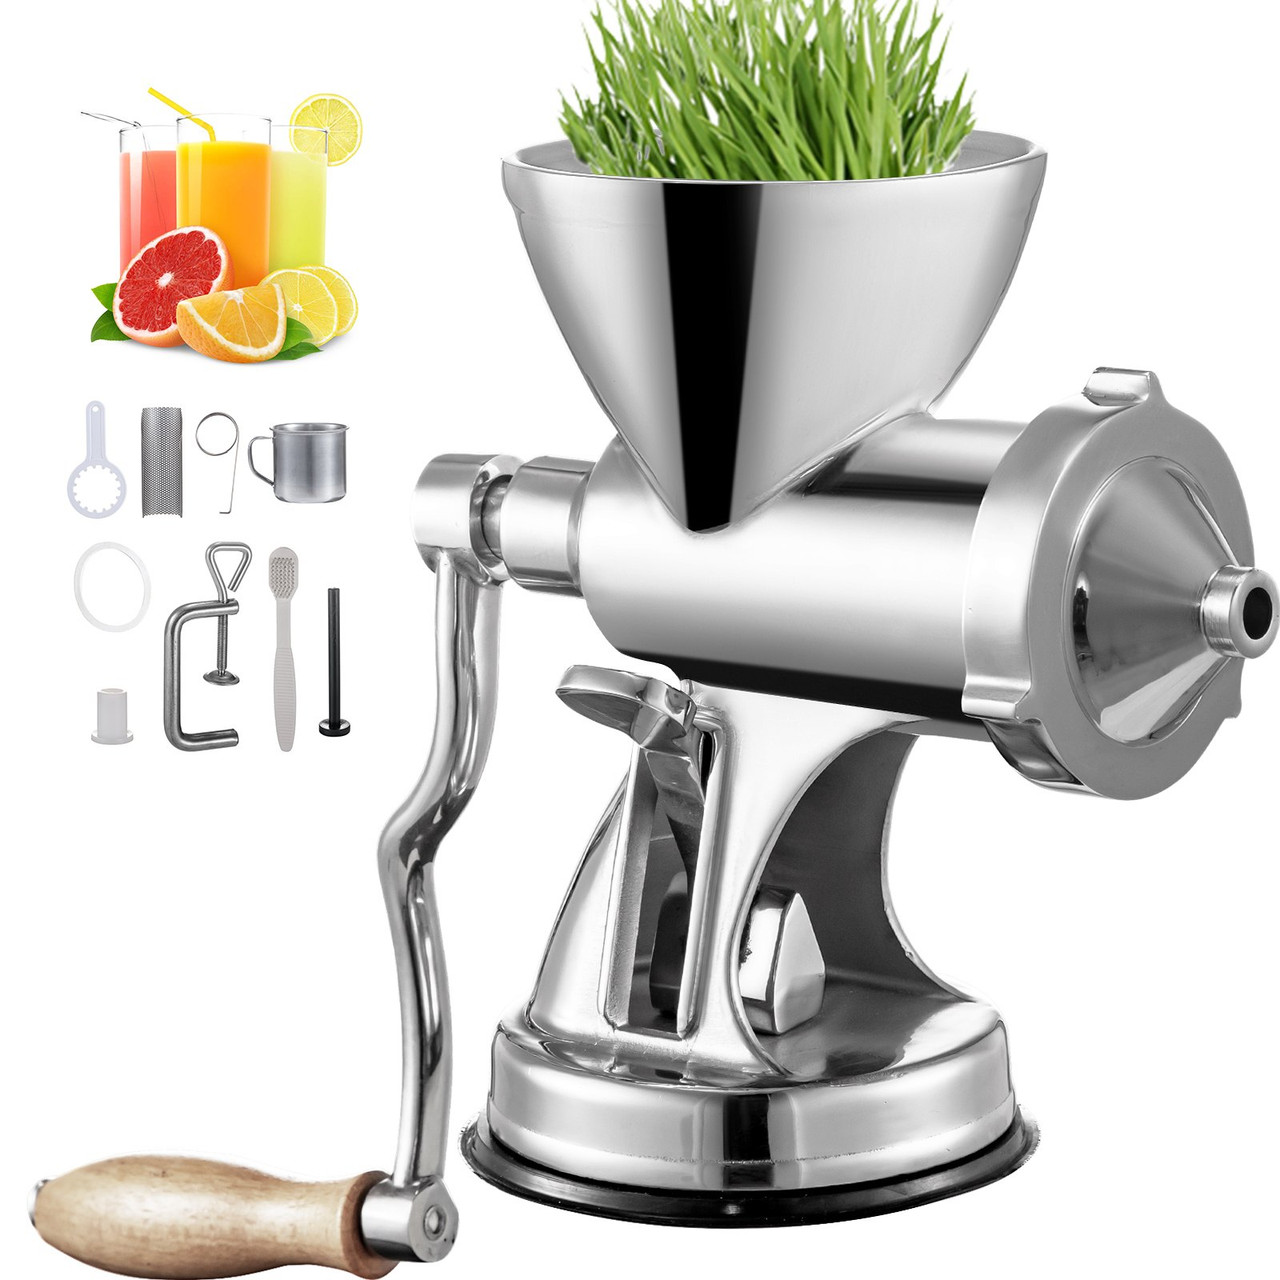 Manual Wheatgrass Juicer with Suction Cup Base & Desktop Clamp Wheat Grass Grinder Long Screw Shaft Wheatgrass Juicer Stainless Steel for Juicing Wheatgrass Gingers Apples Grapes